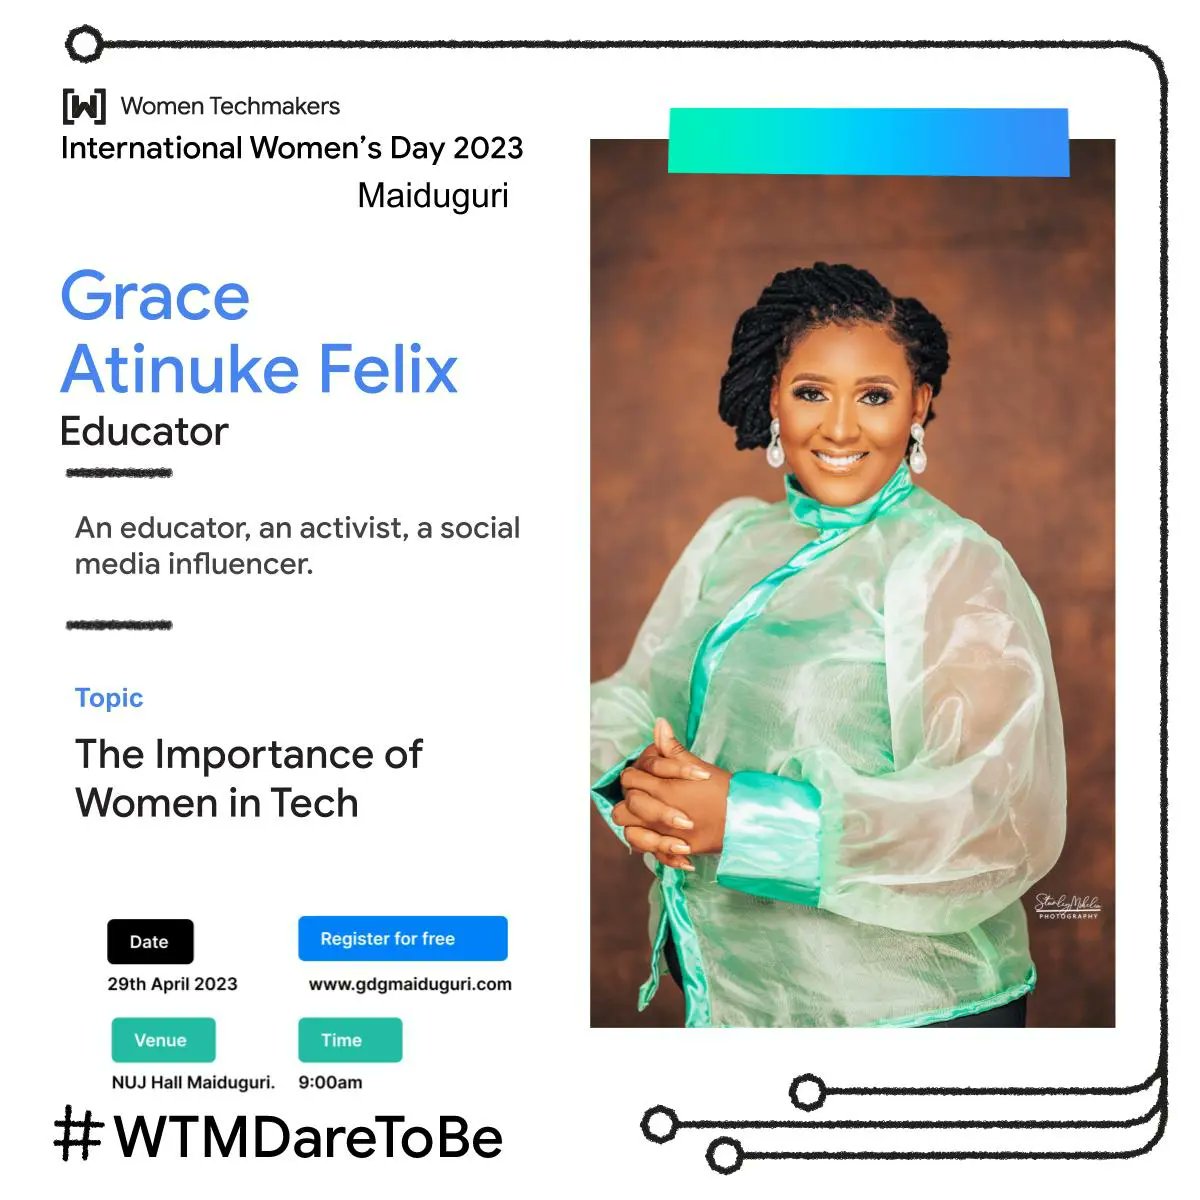 The program organised by Women Tech Makers Maiduguri branch (@WTMMaid) was a great success. We learned, played, laughed, ate, had a panel session and Dared to be. I spoke on the 'Importance of Women in Tech' and it was great to see young girls & women beginning to... #WTMDareToBe